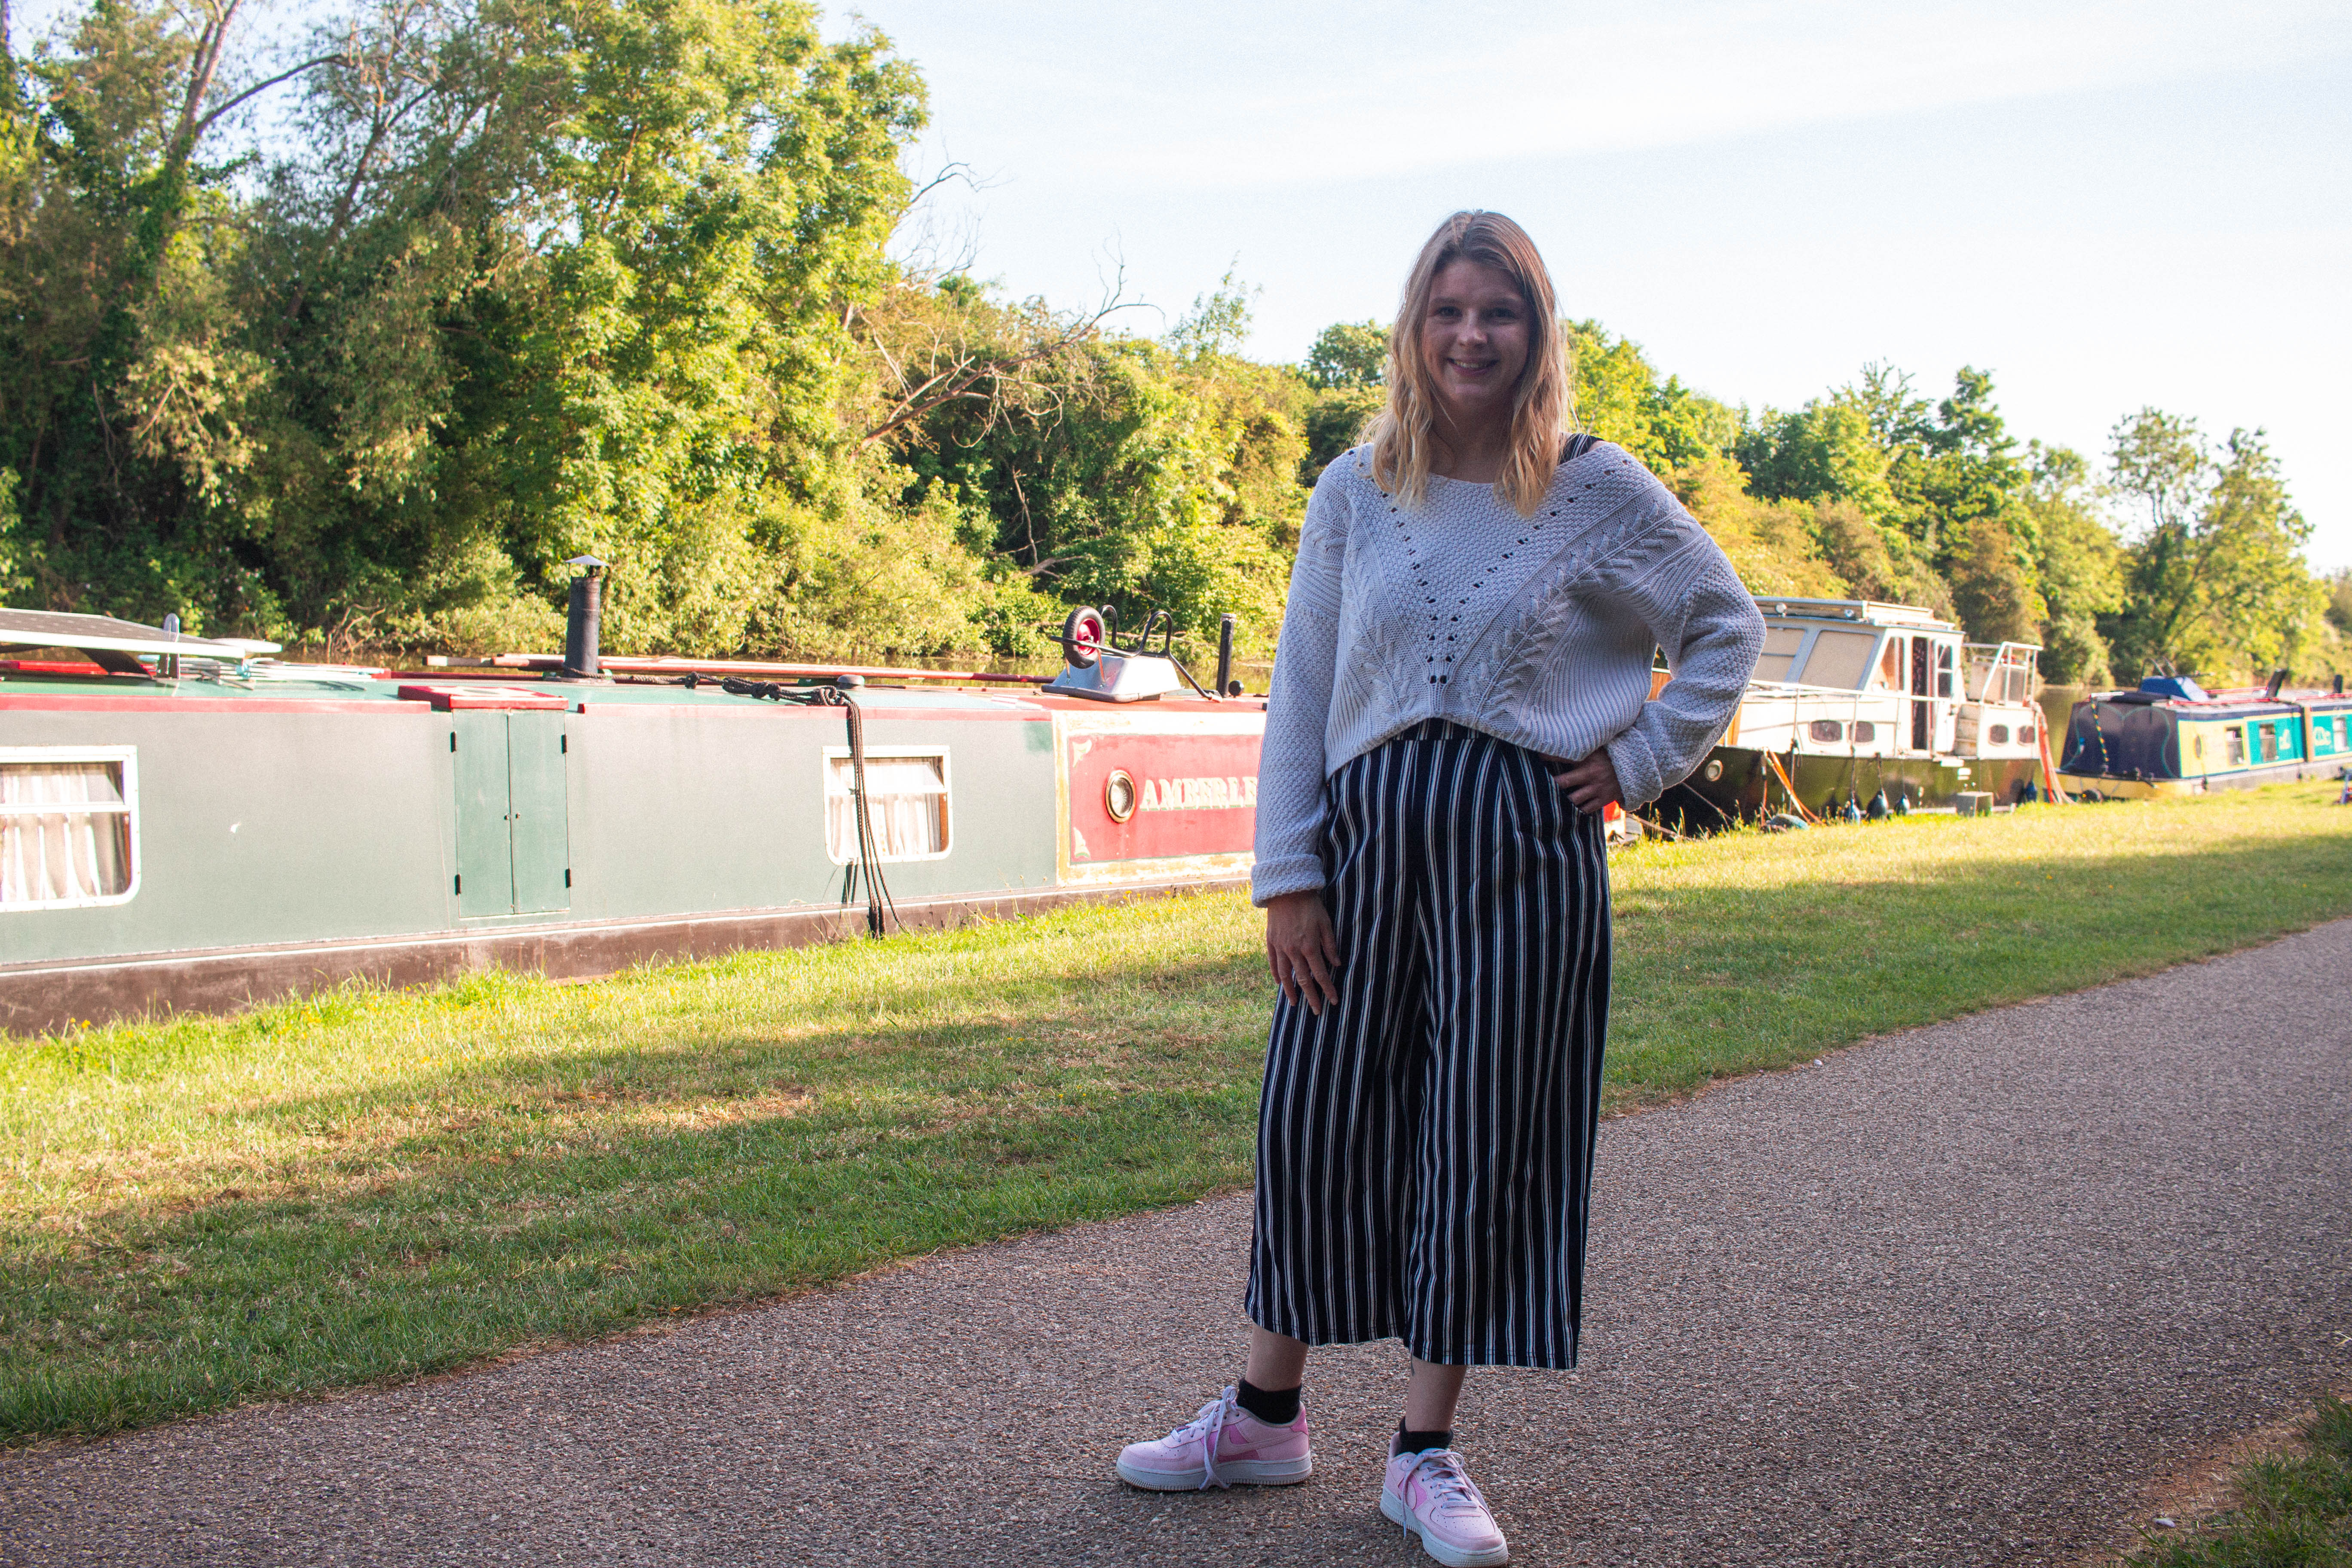 Fashion blogger chloeharriets - outfit details - positive habits for happiness